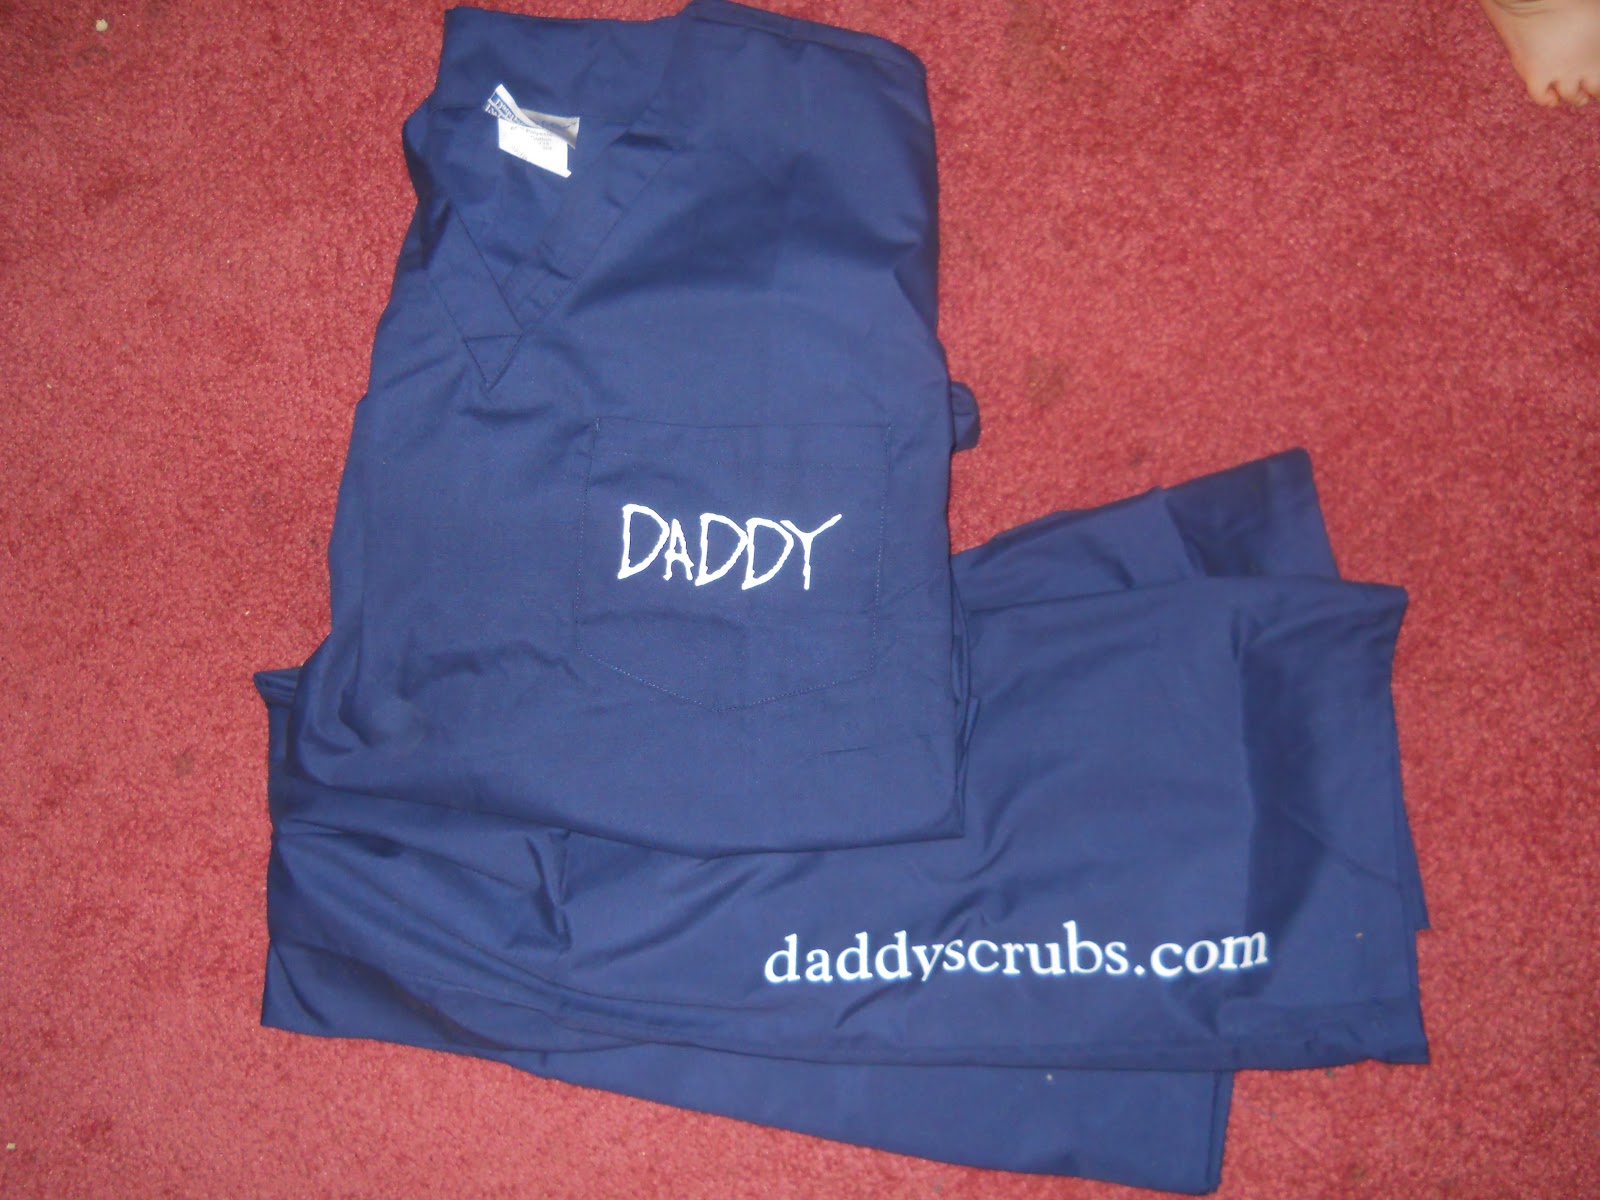 Daddy Scrubs Review Giveaway Momma4life